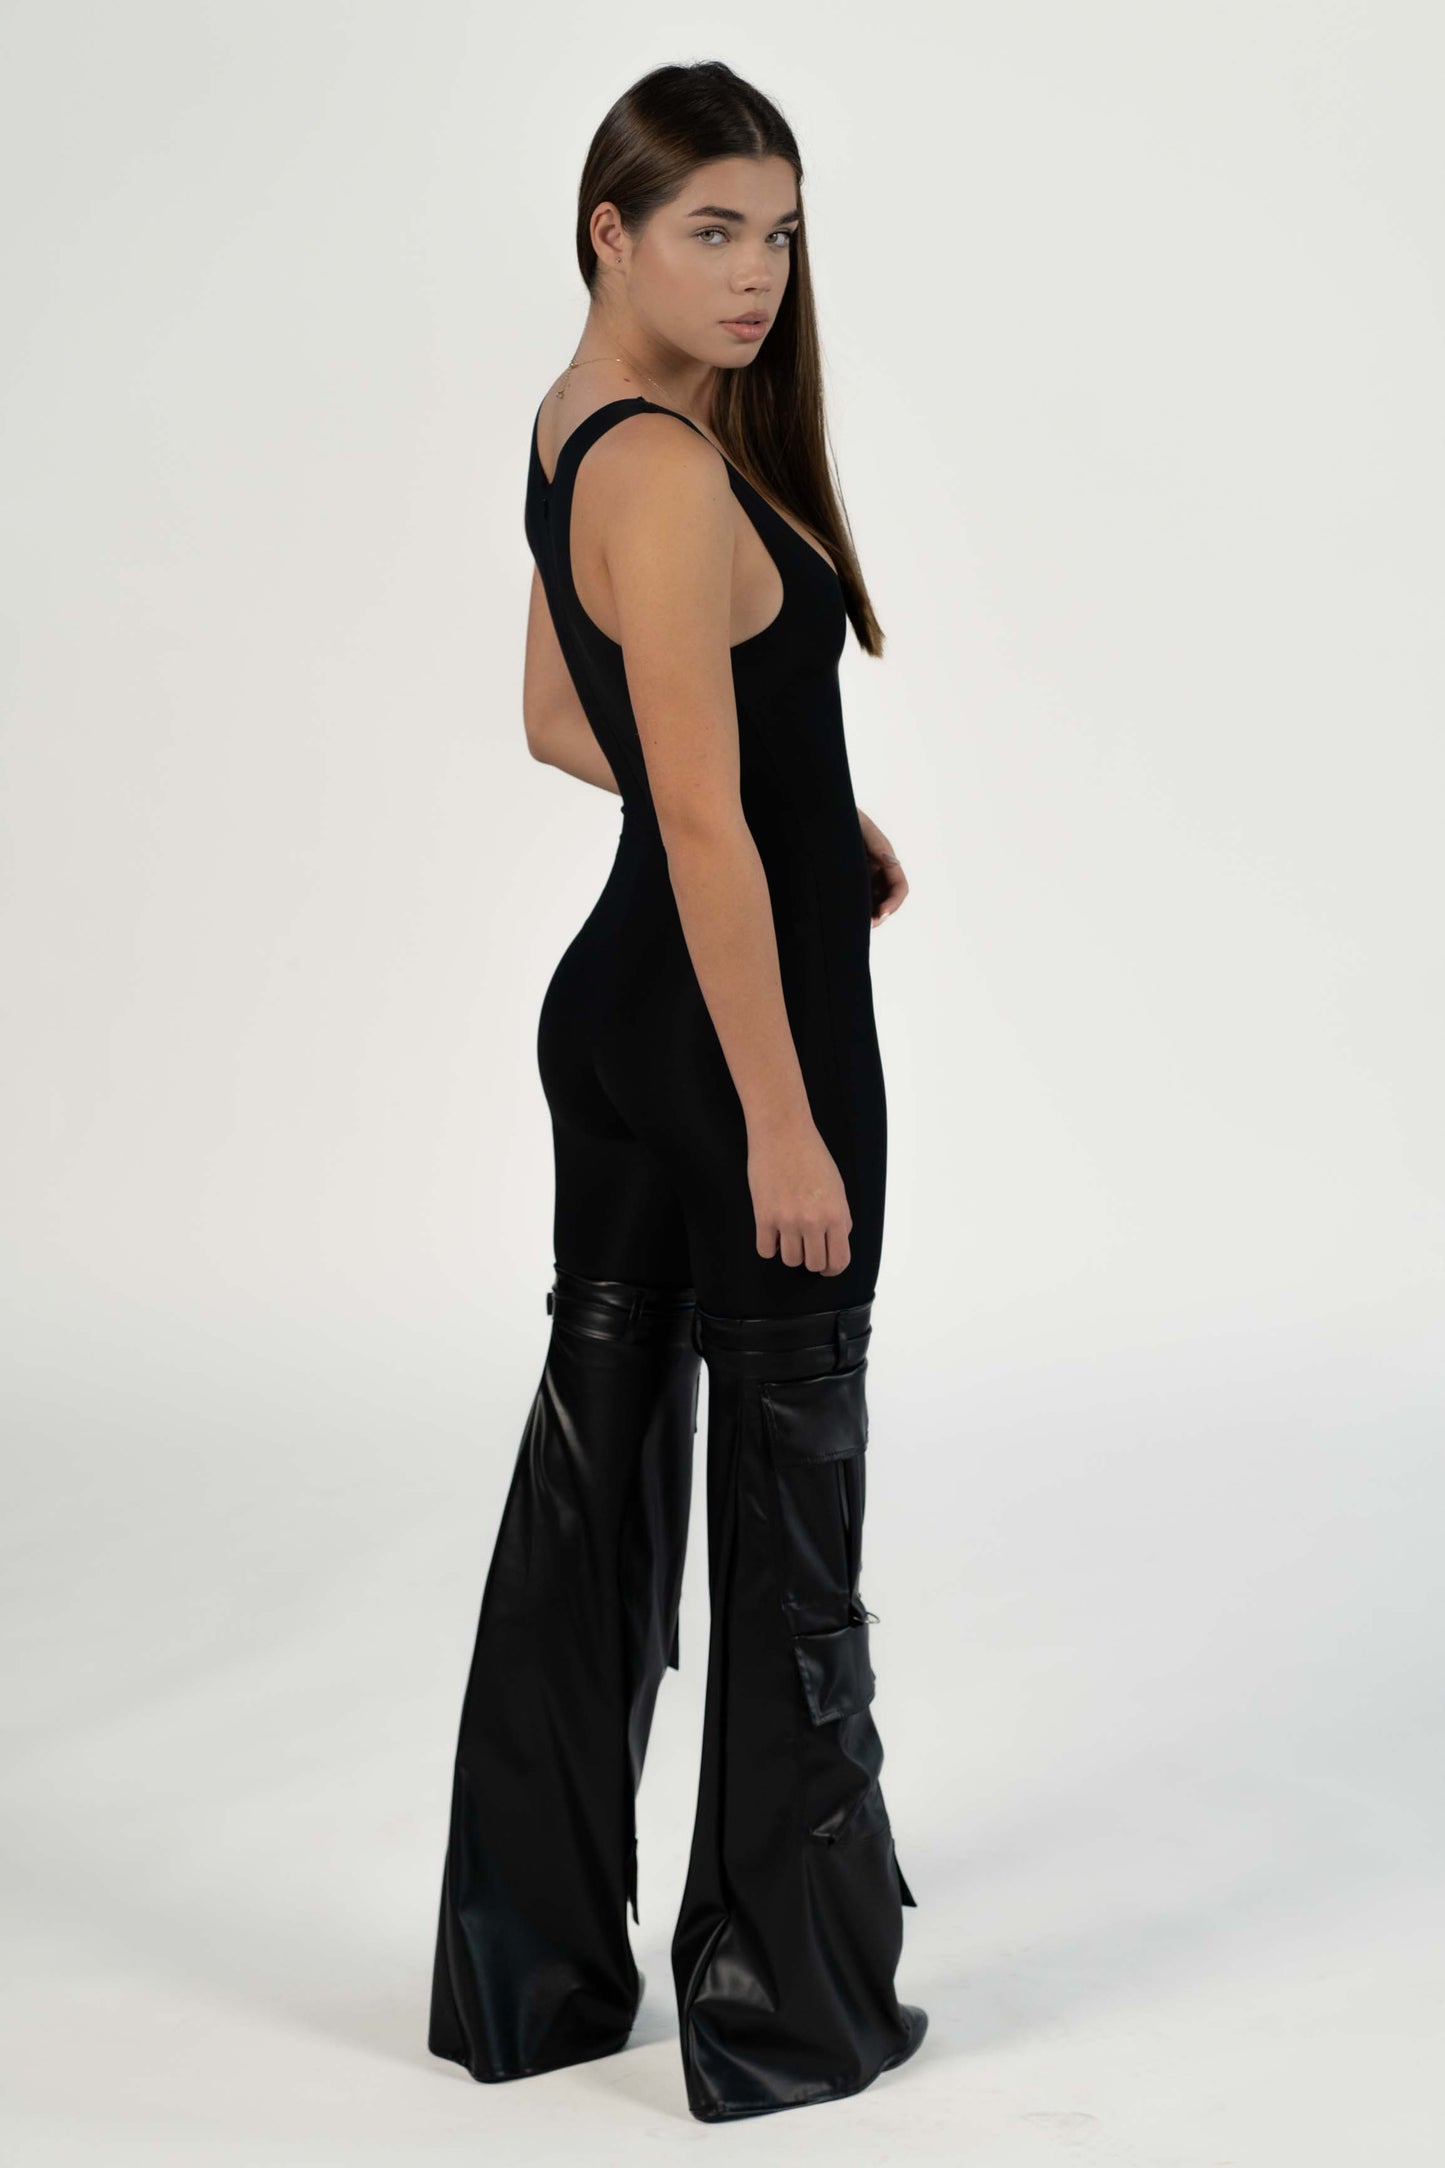 Camaro faux leather knee trousers